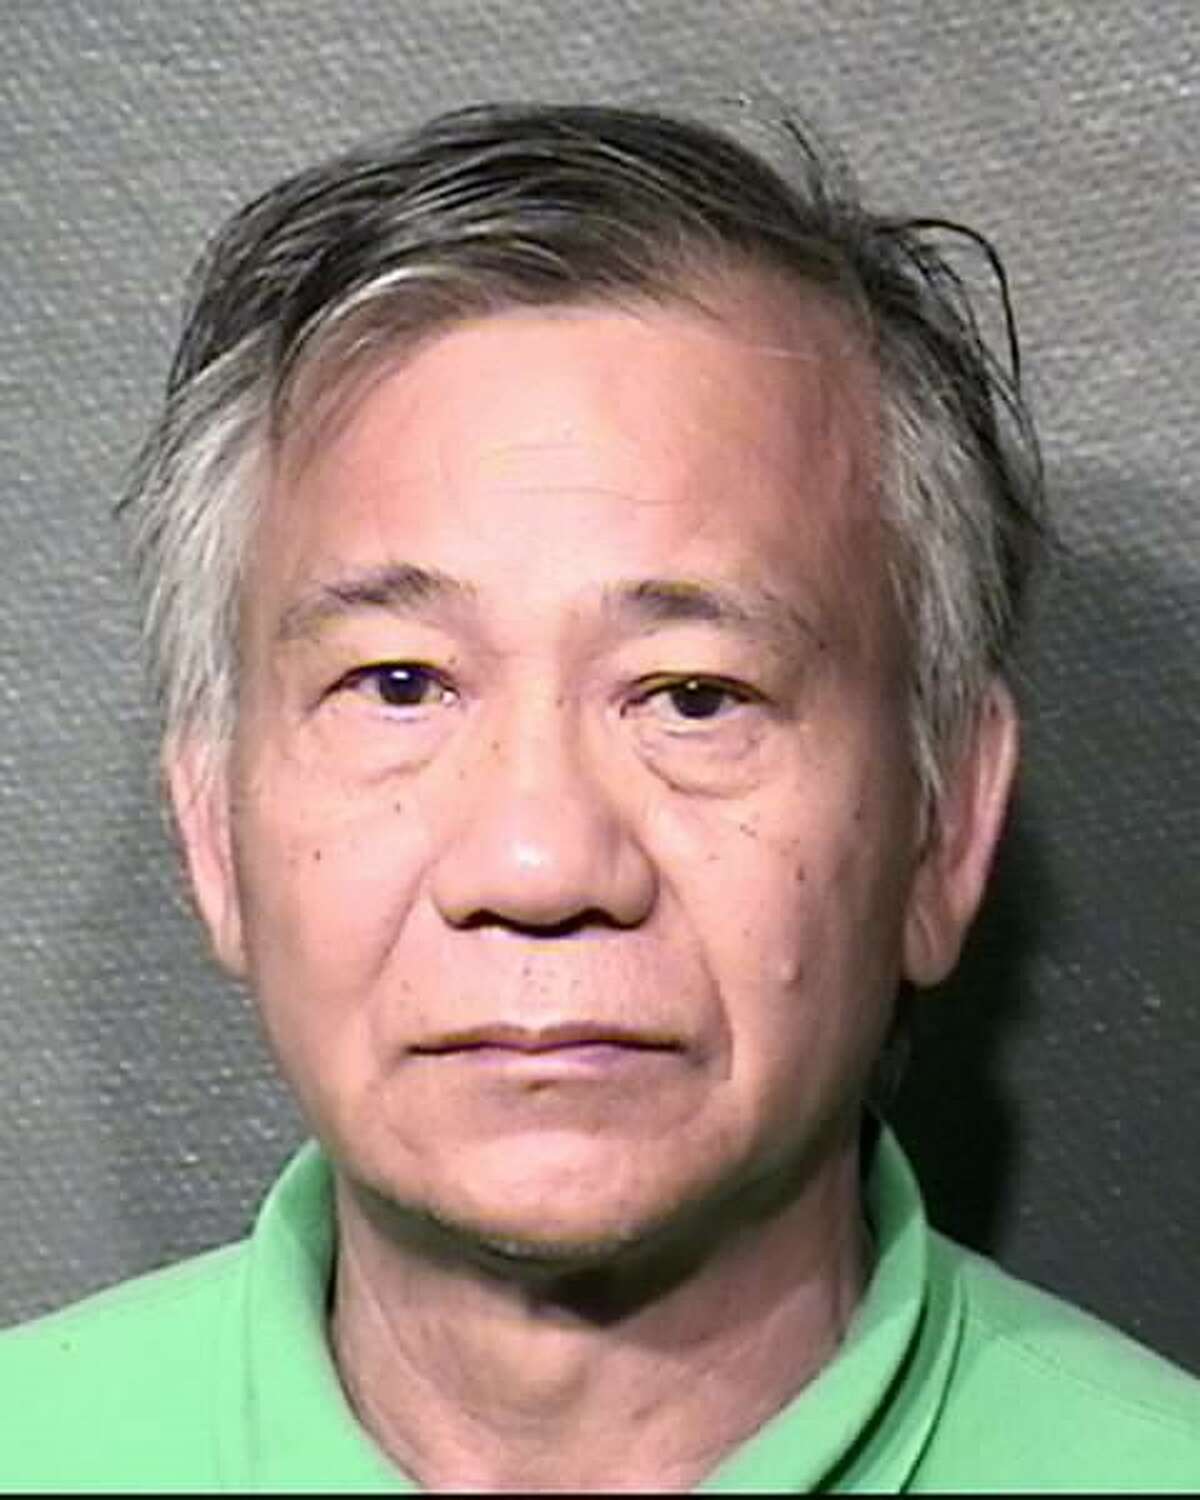 Binh Trinh, 65, is charged with murder in the shooting death of his son, 35-year-old Duong To Trinh, about 10:20 a.m. Thursday, June 23, 2016, in the 9500 block of Kempwood. (HPD)